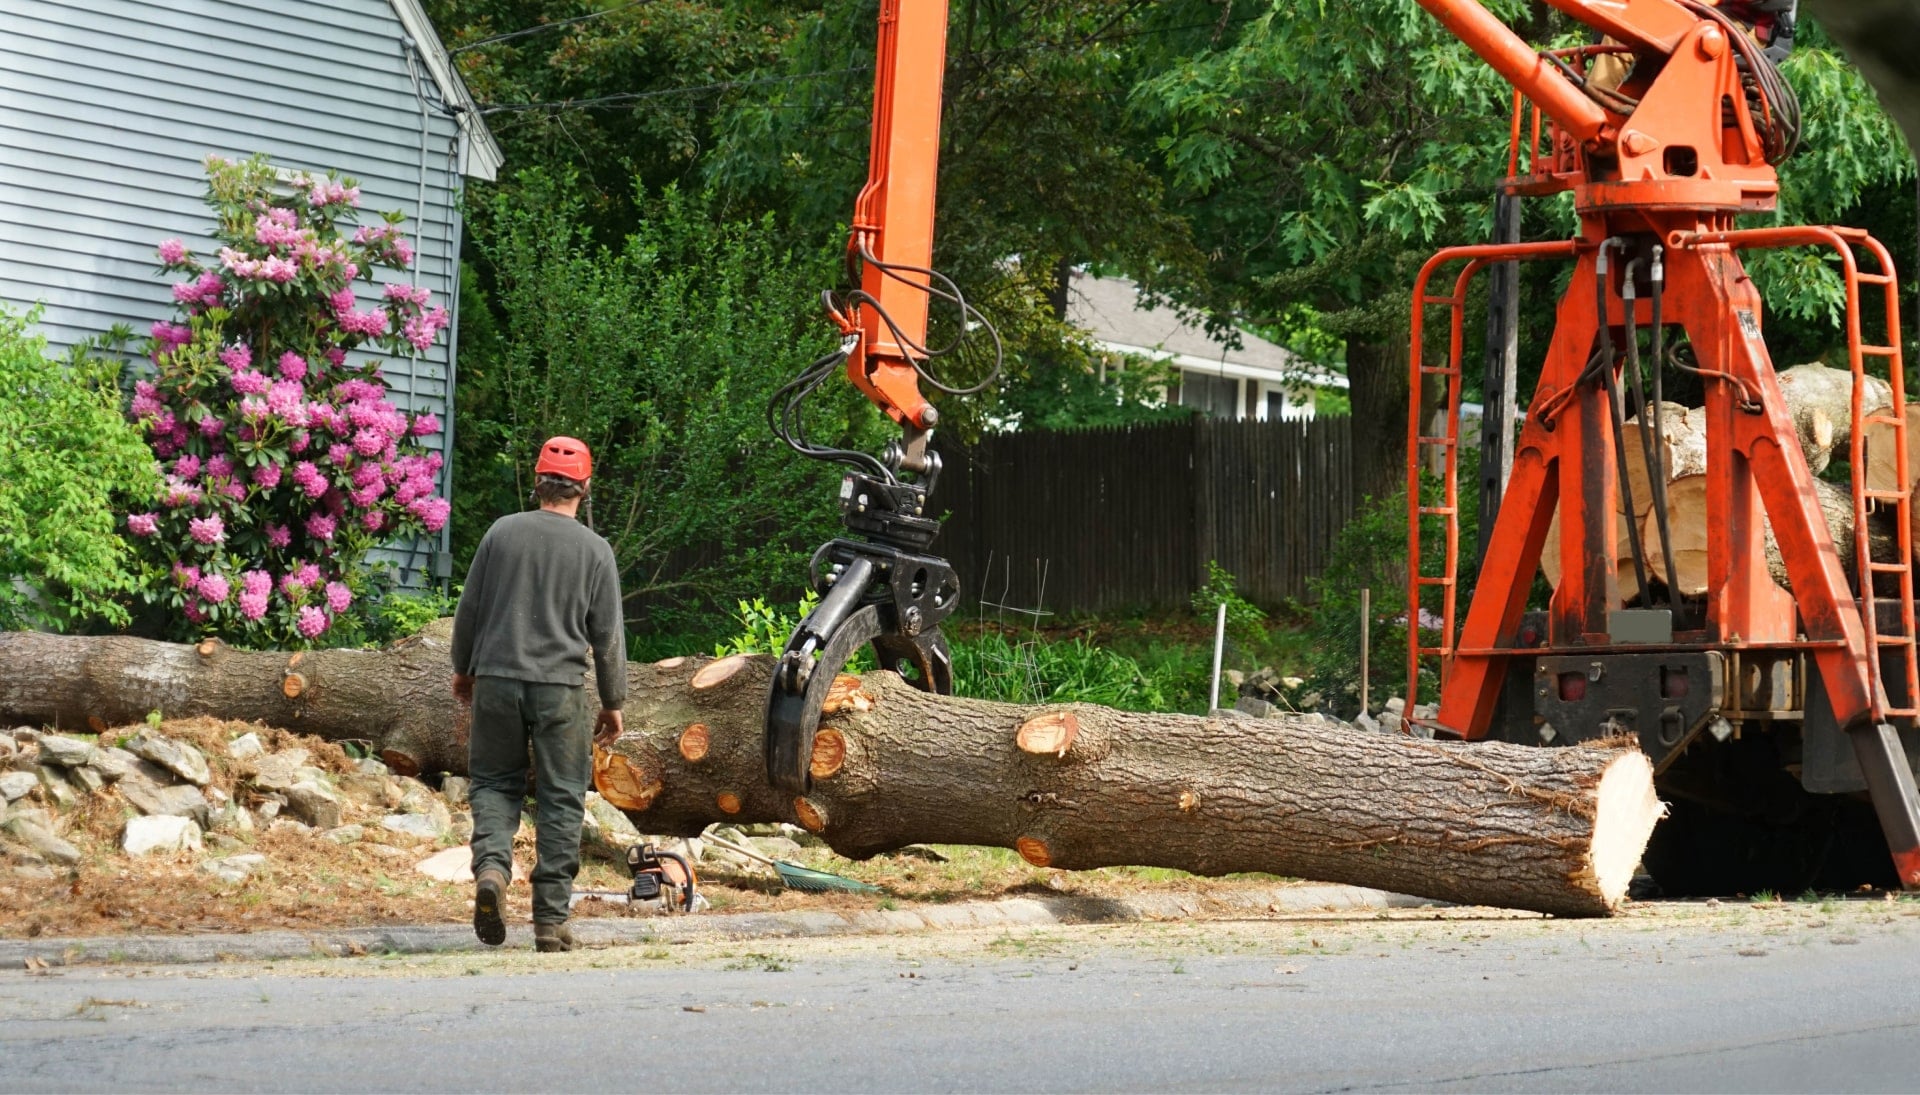 Local partner for Tree removal services in Colorado Springs